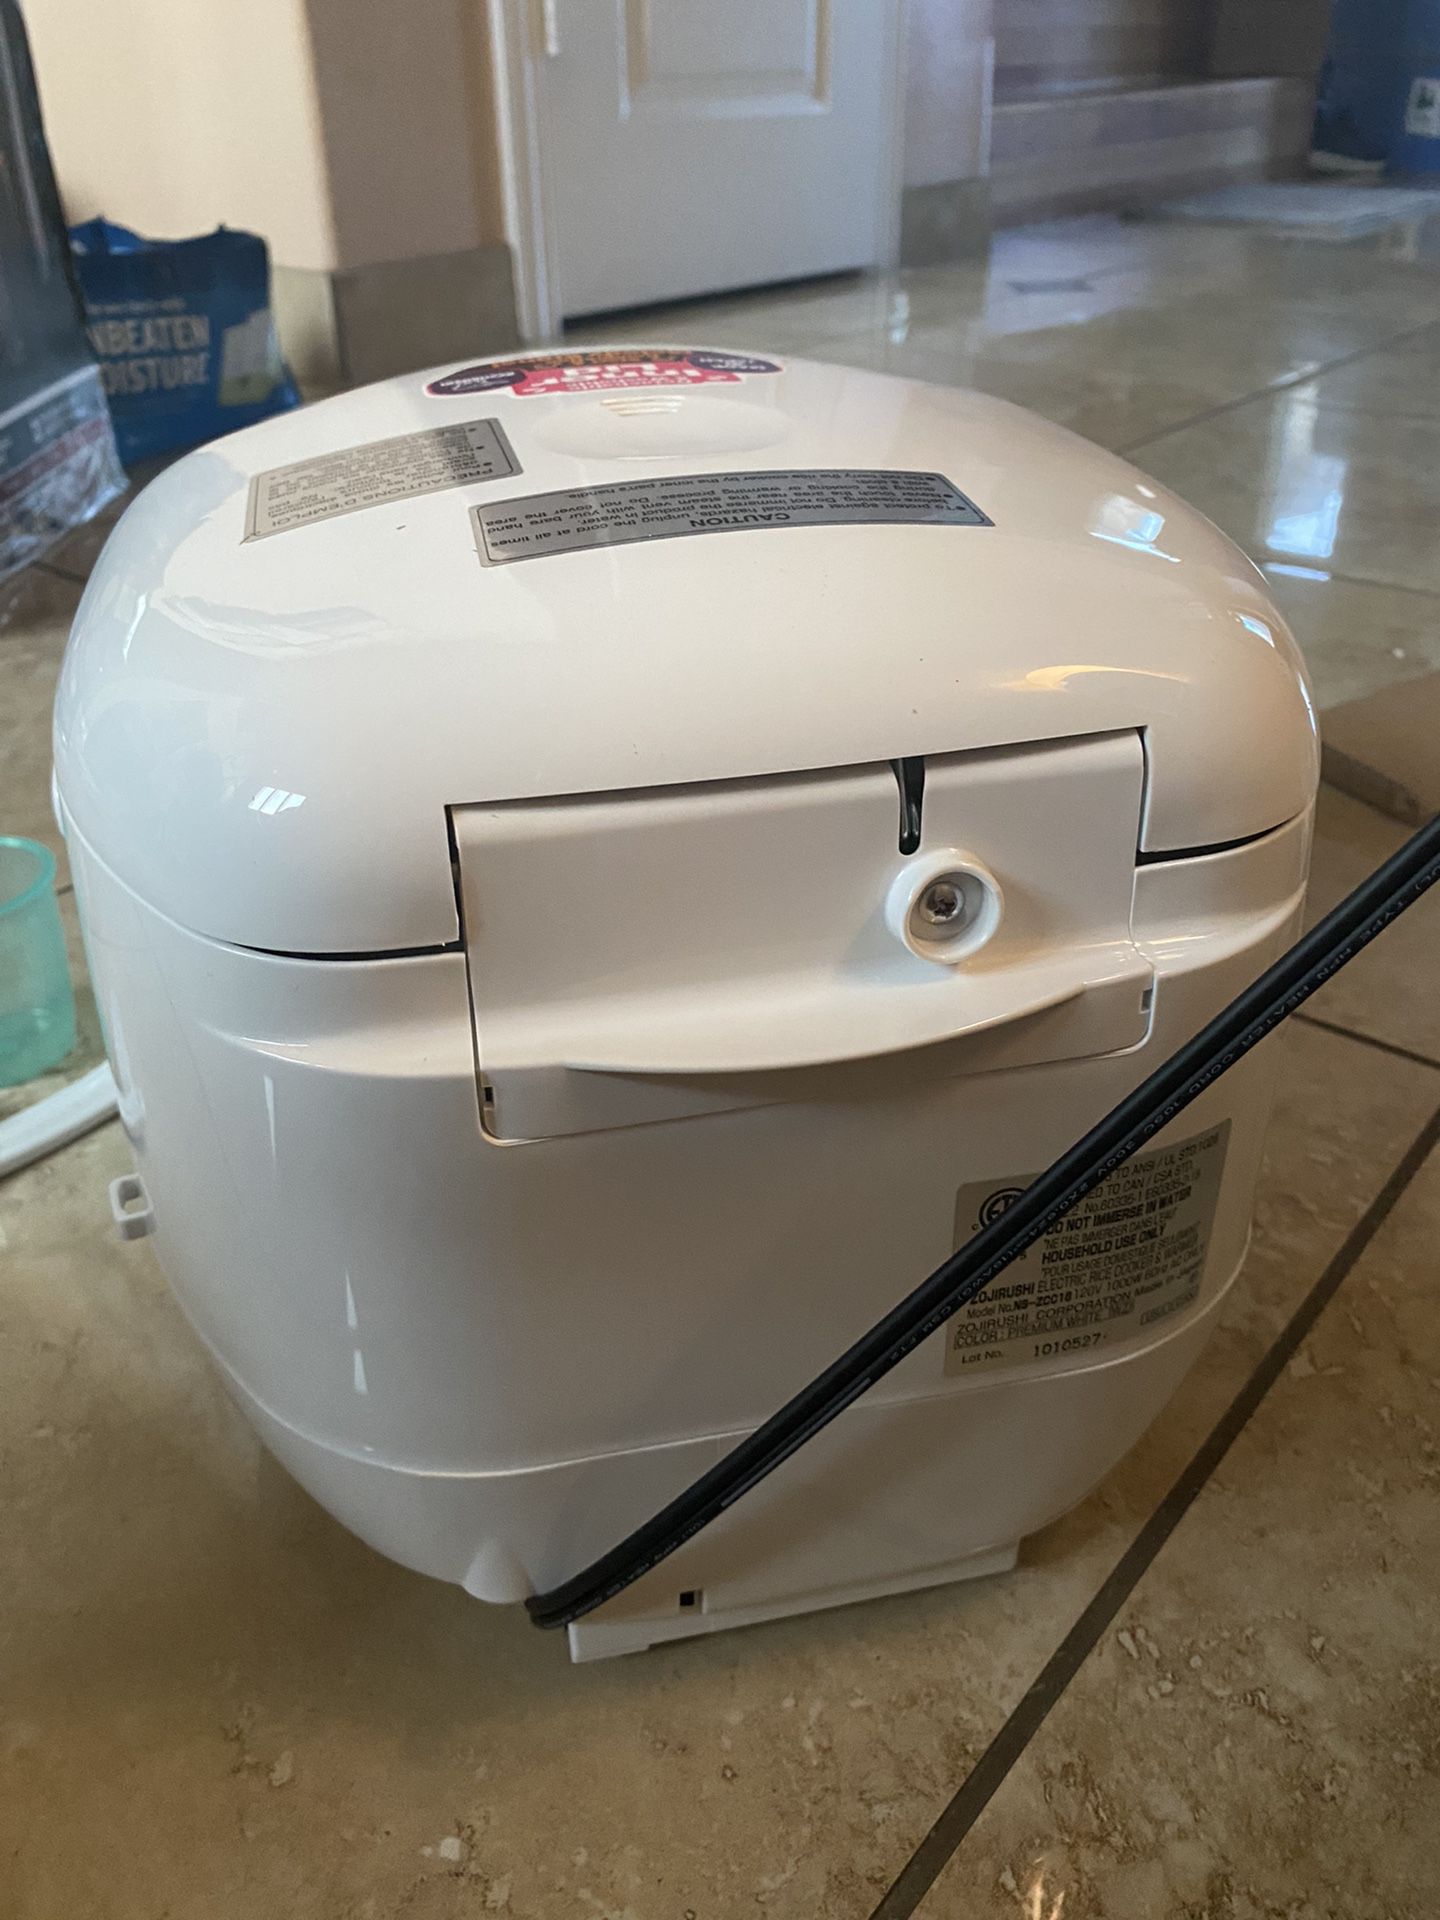 Zojirushi NS-ZCC18 Neuro Fuzzy Rice Cooker & Warmer, 10 Cup, Premium White,  Made in Japan for Sale in Philadelphia, PA - OfferUp